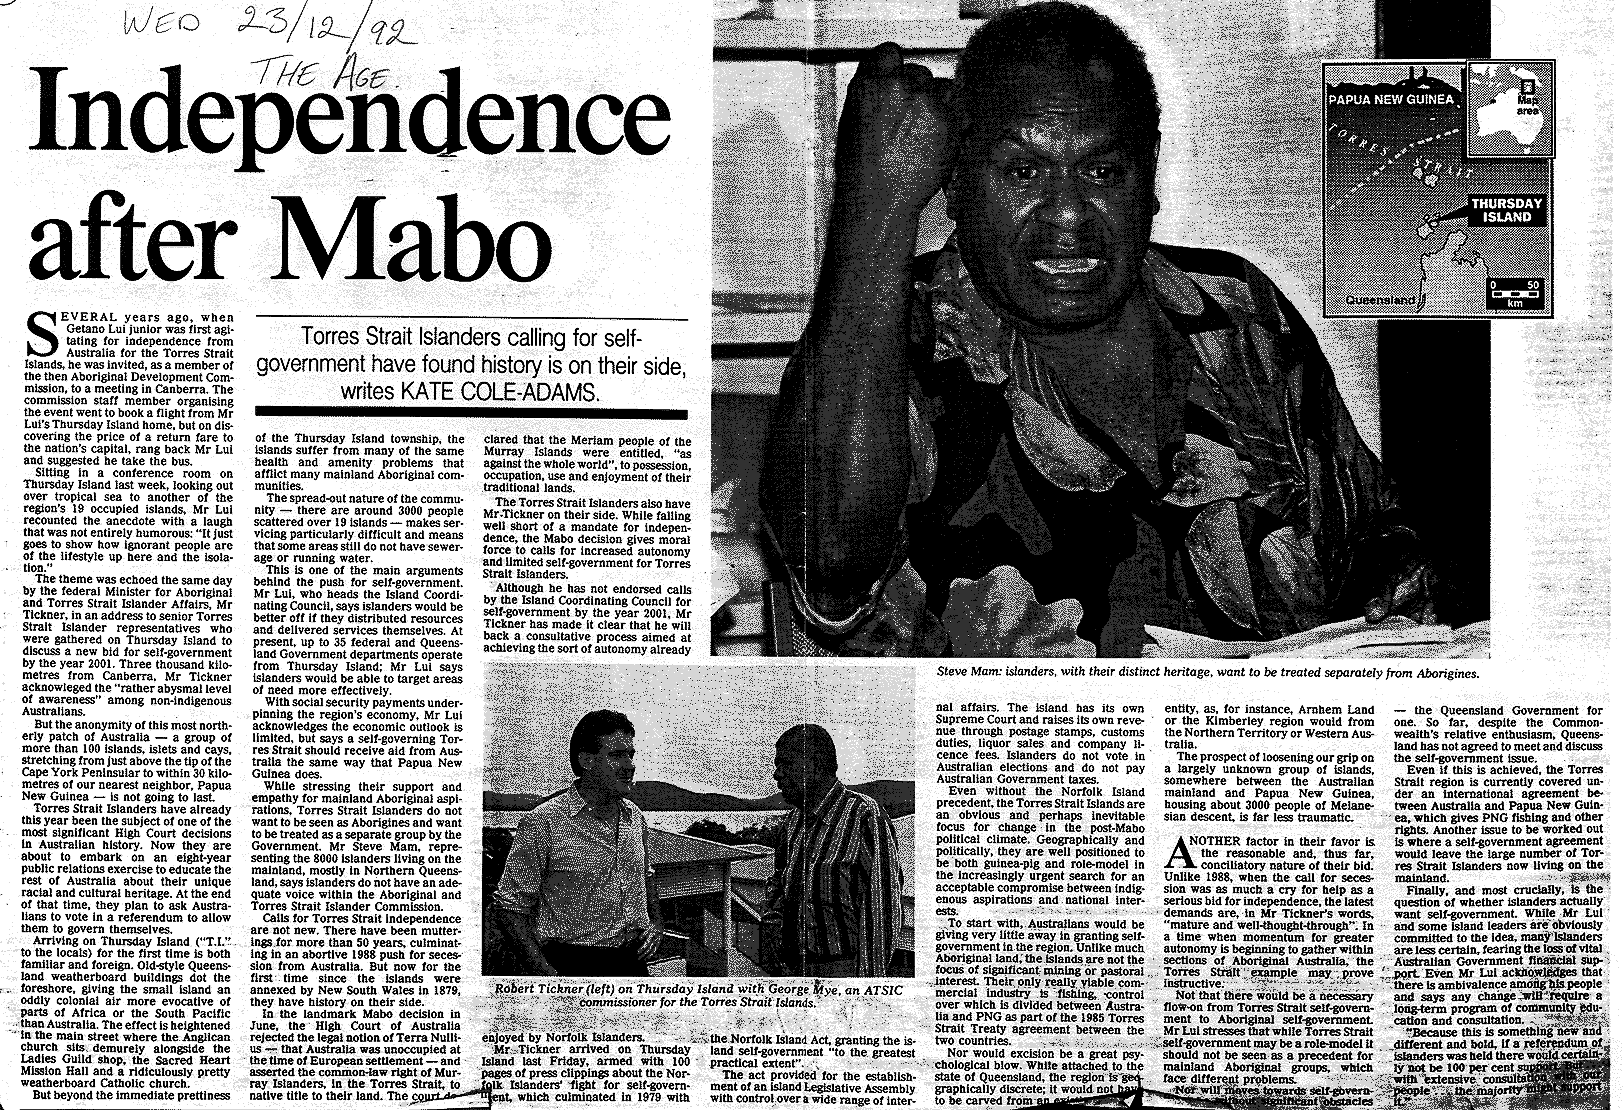 Independence after Mabo, 1992